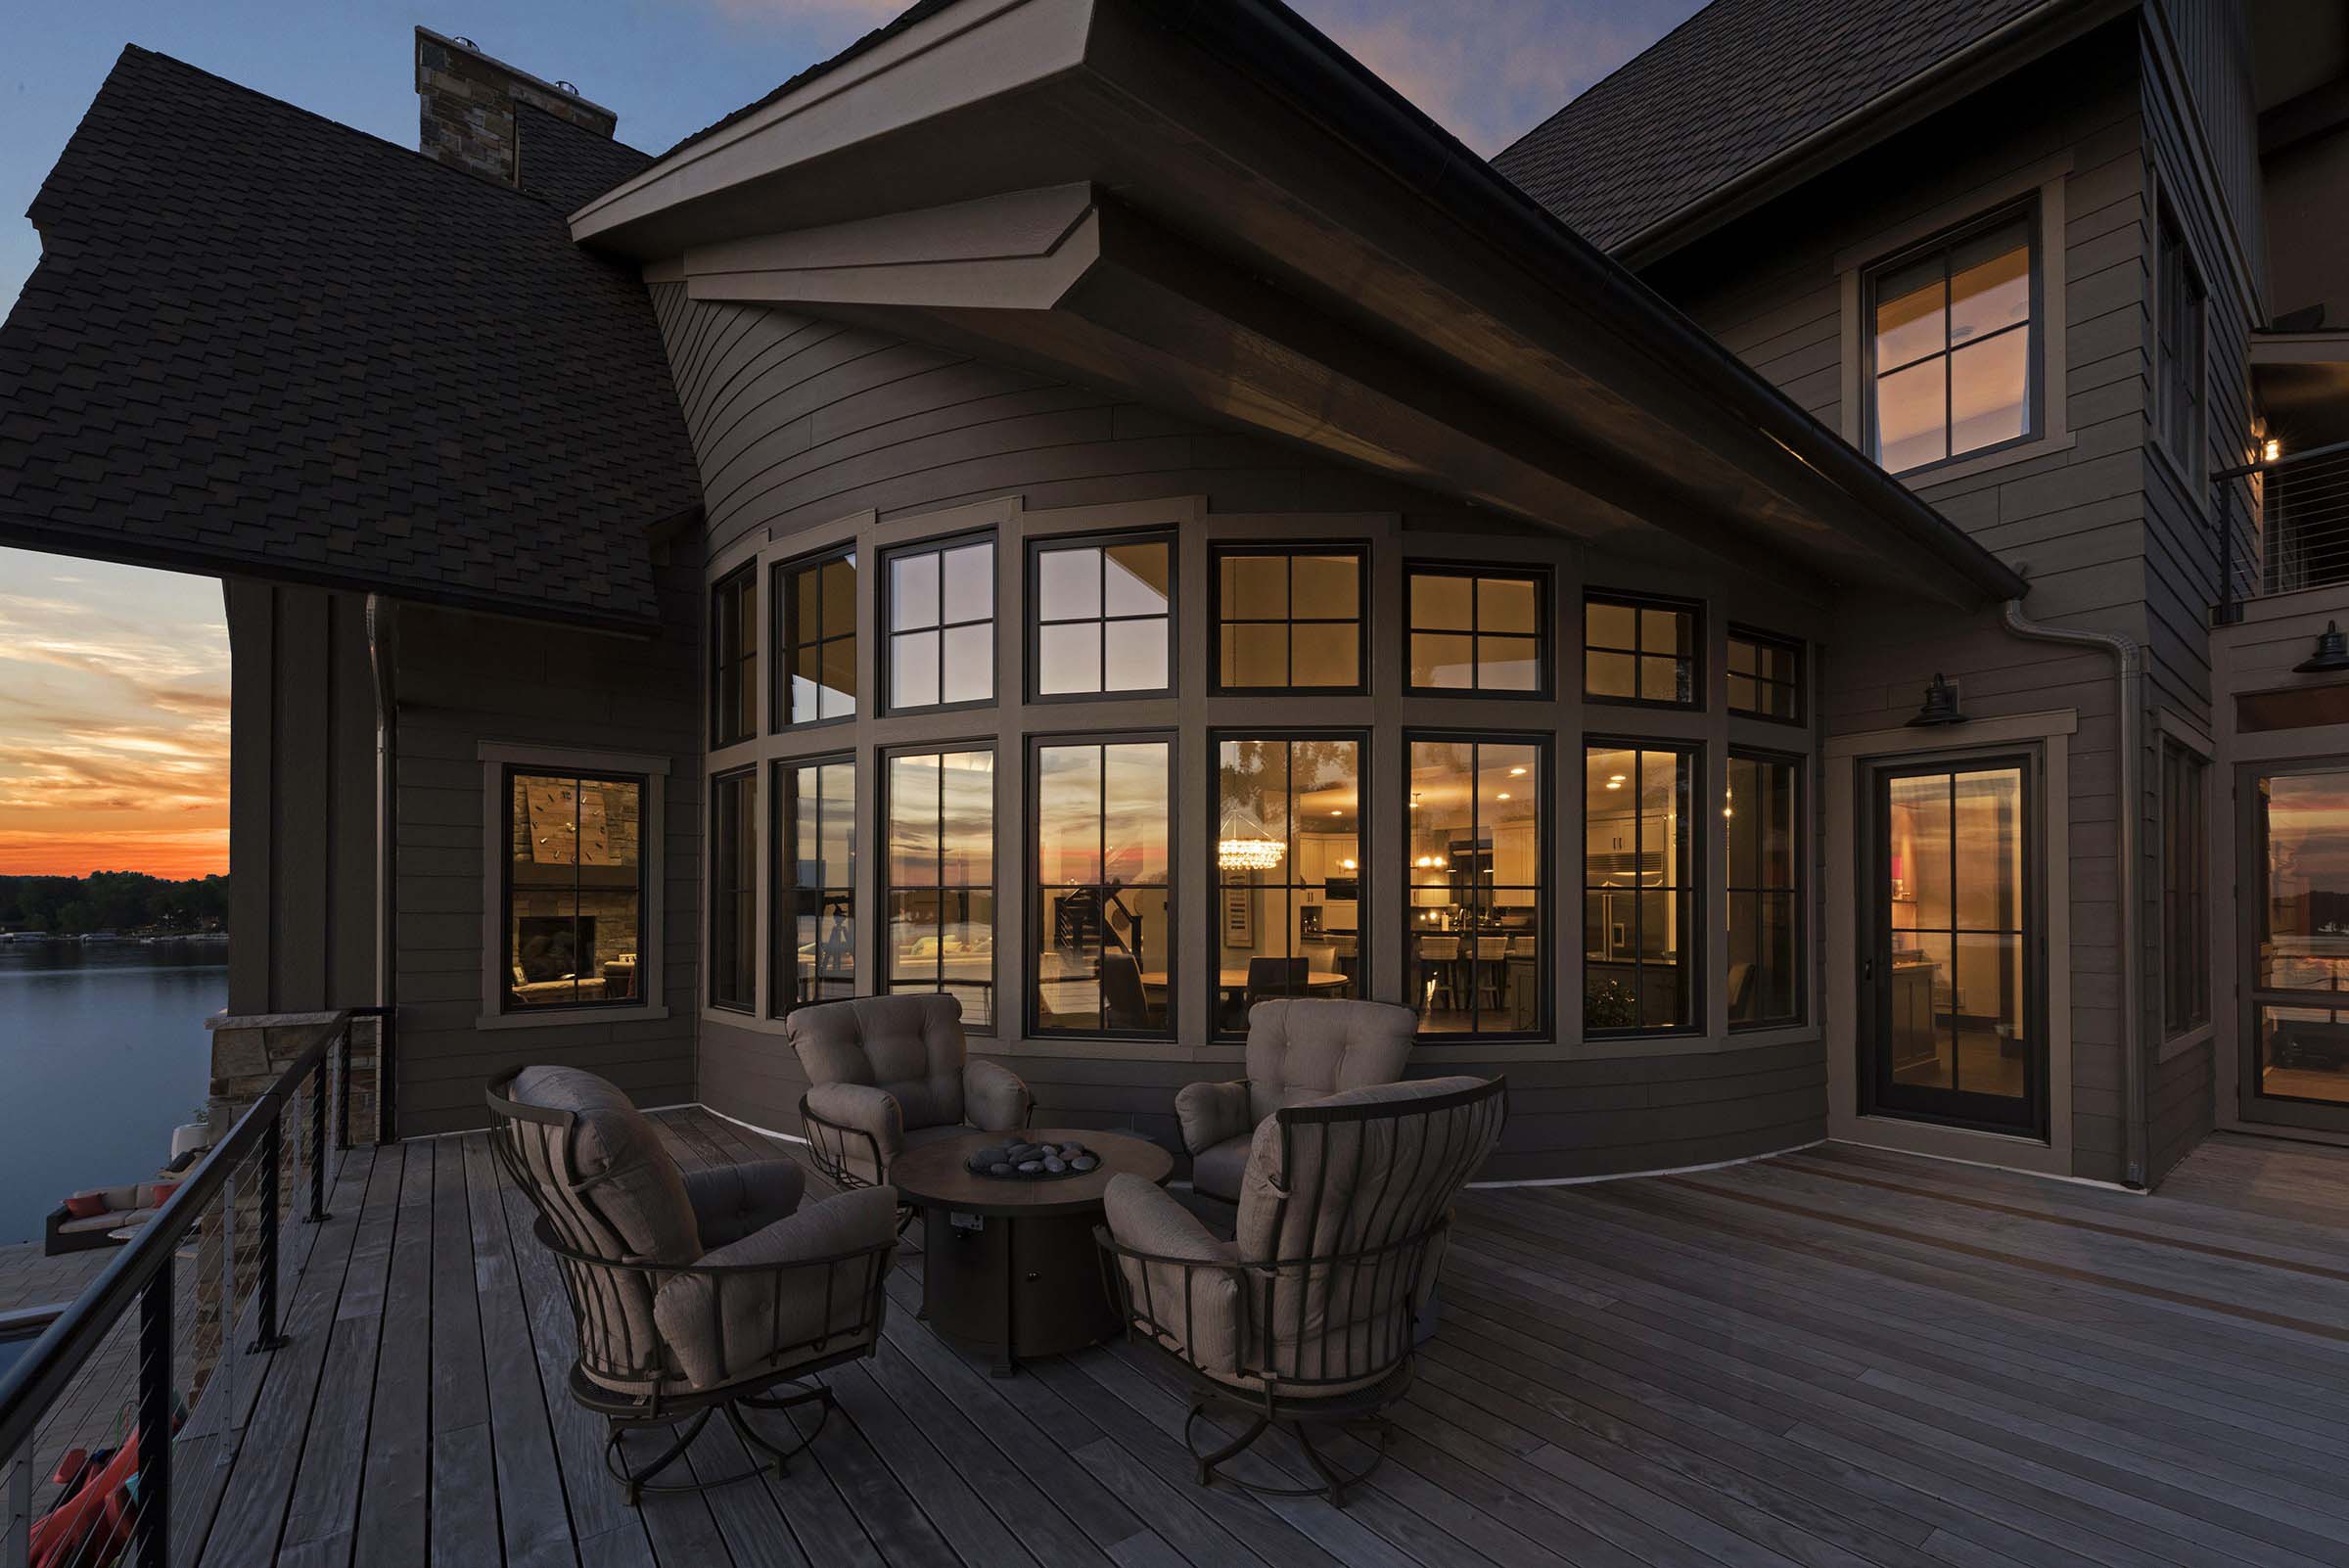 A house with a deck overlooking a lake at dusk, showcasing exceptional home exterior design ideas.